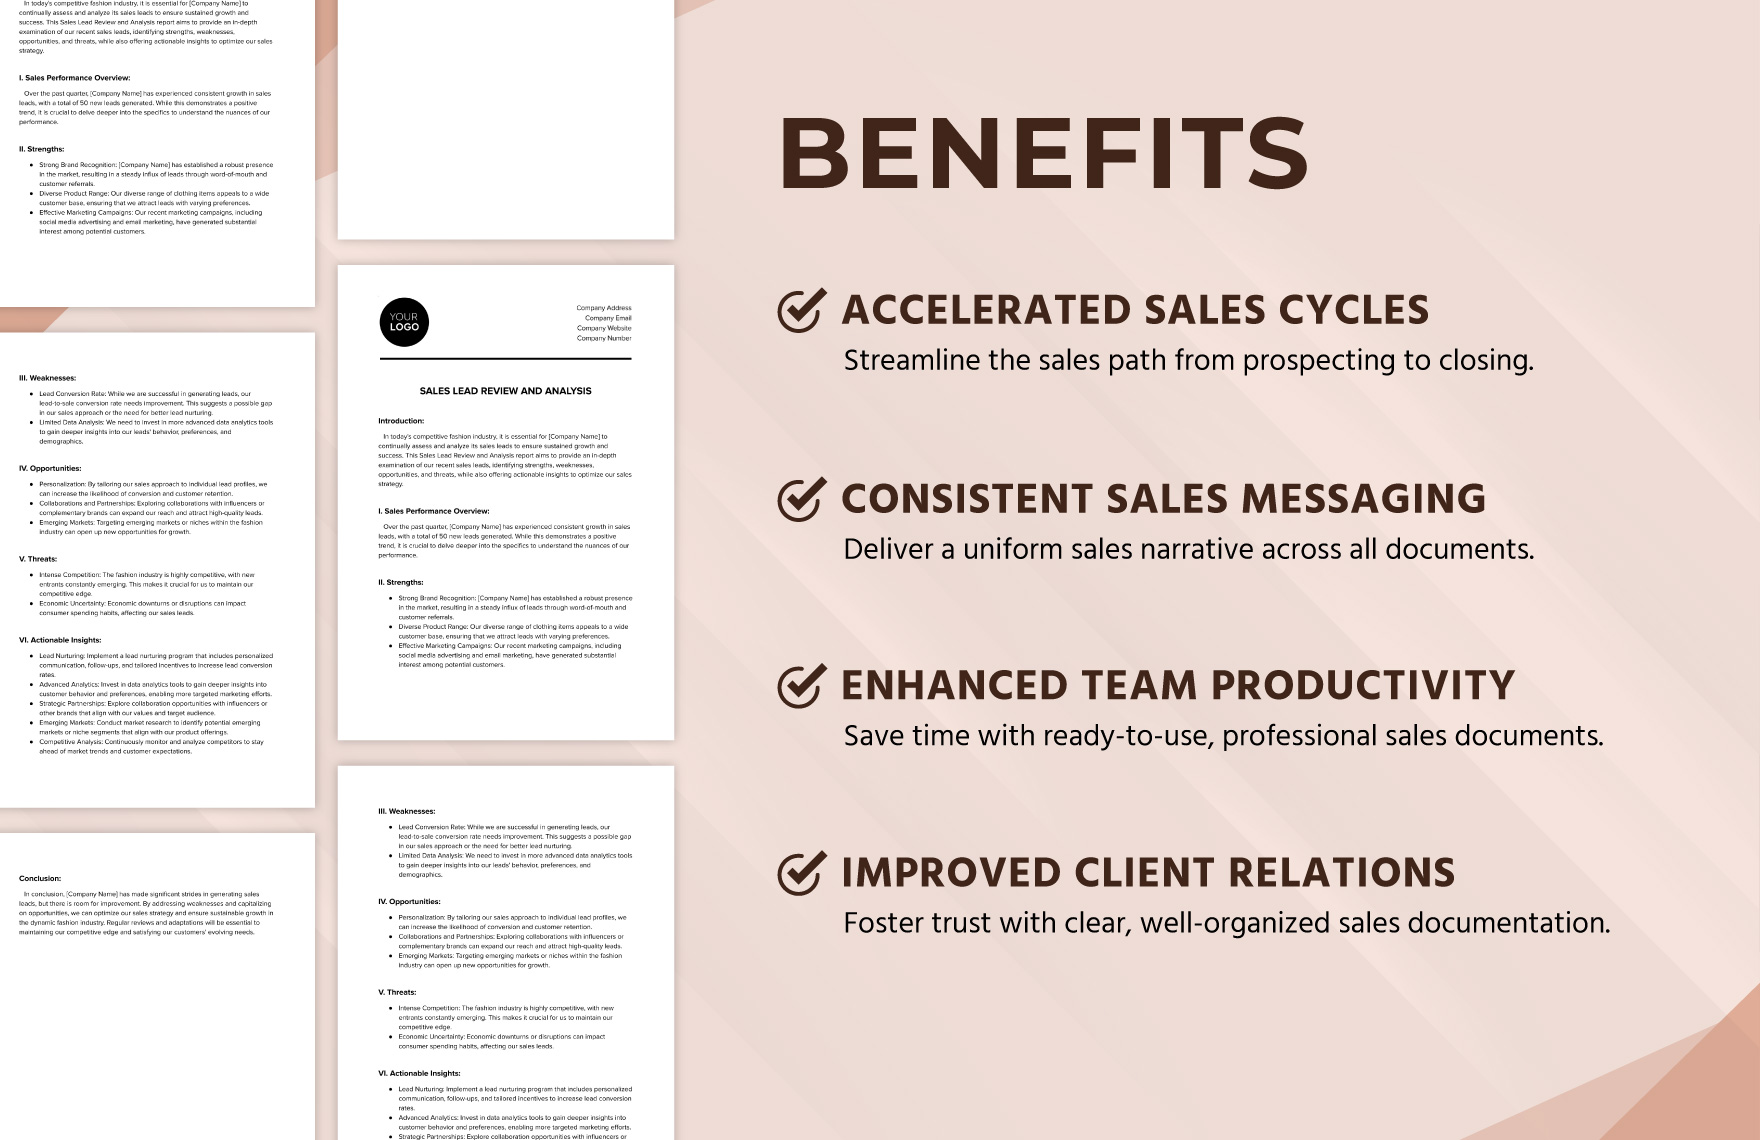 Sales Lead Review and Analysis Template